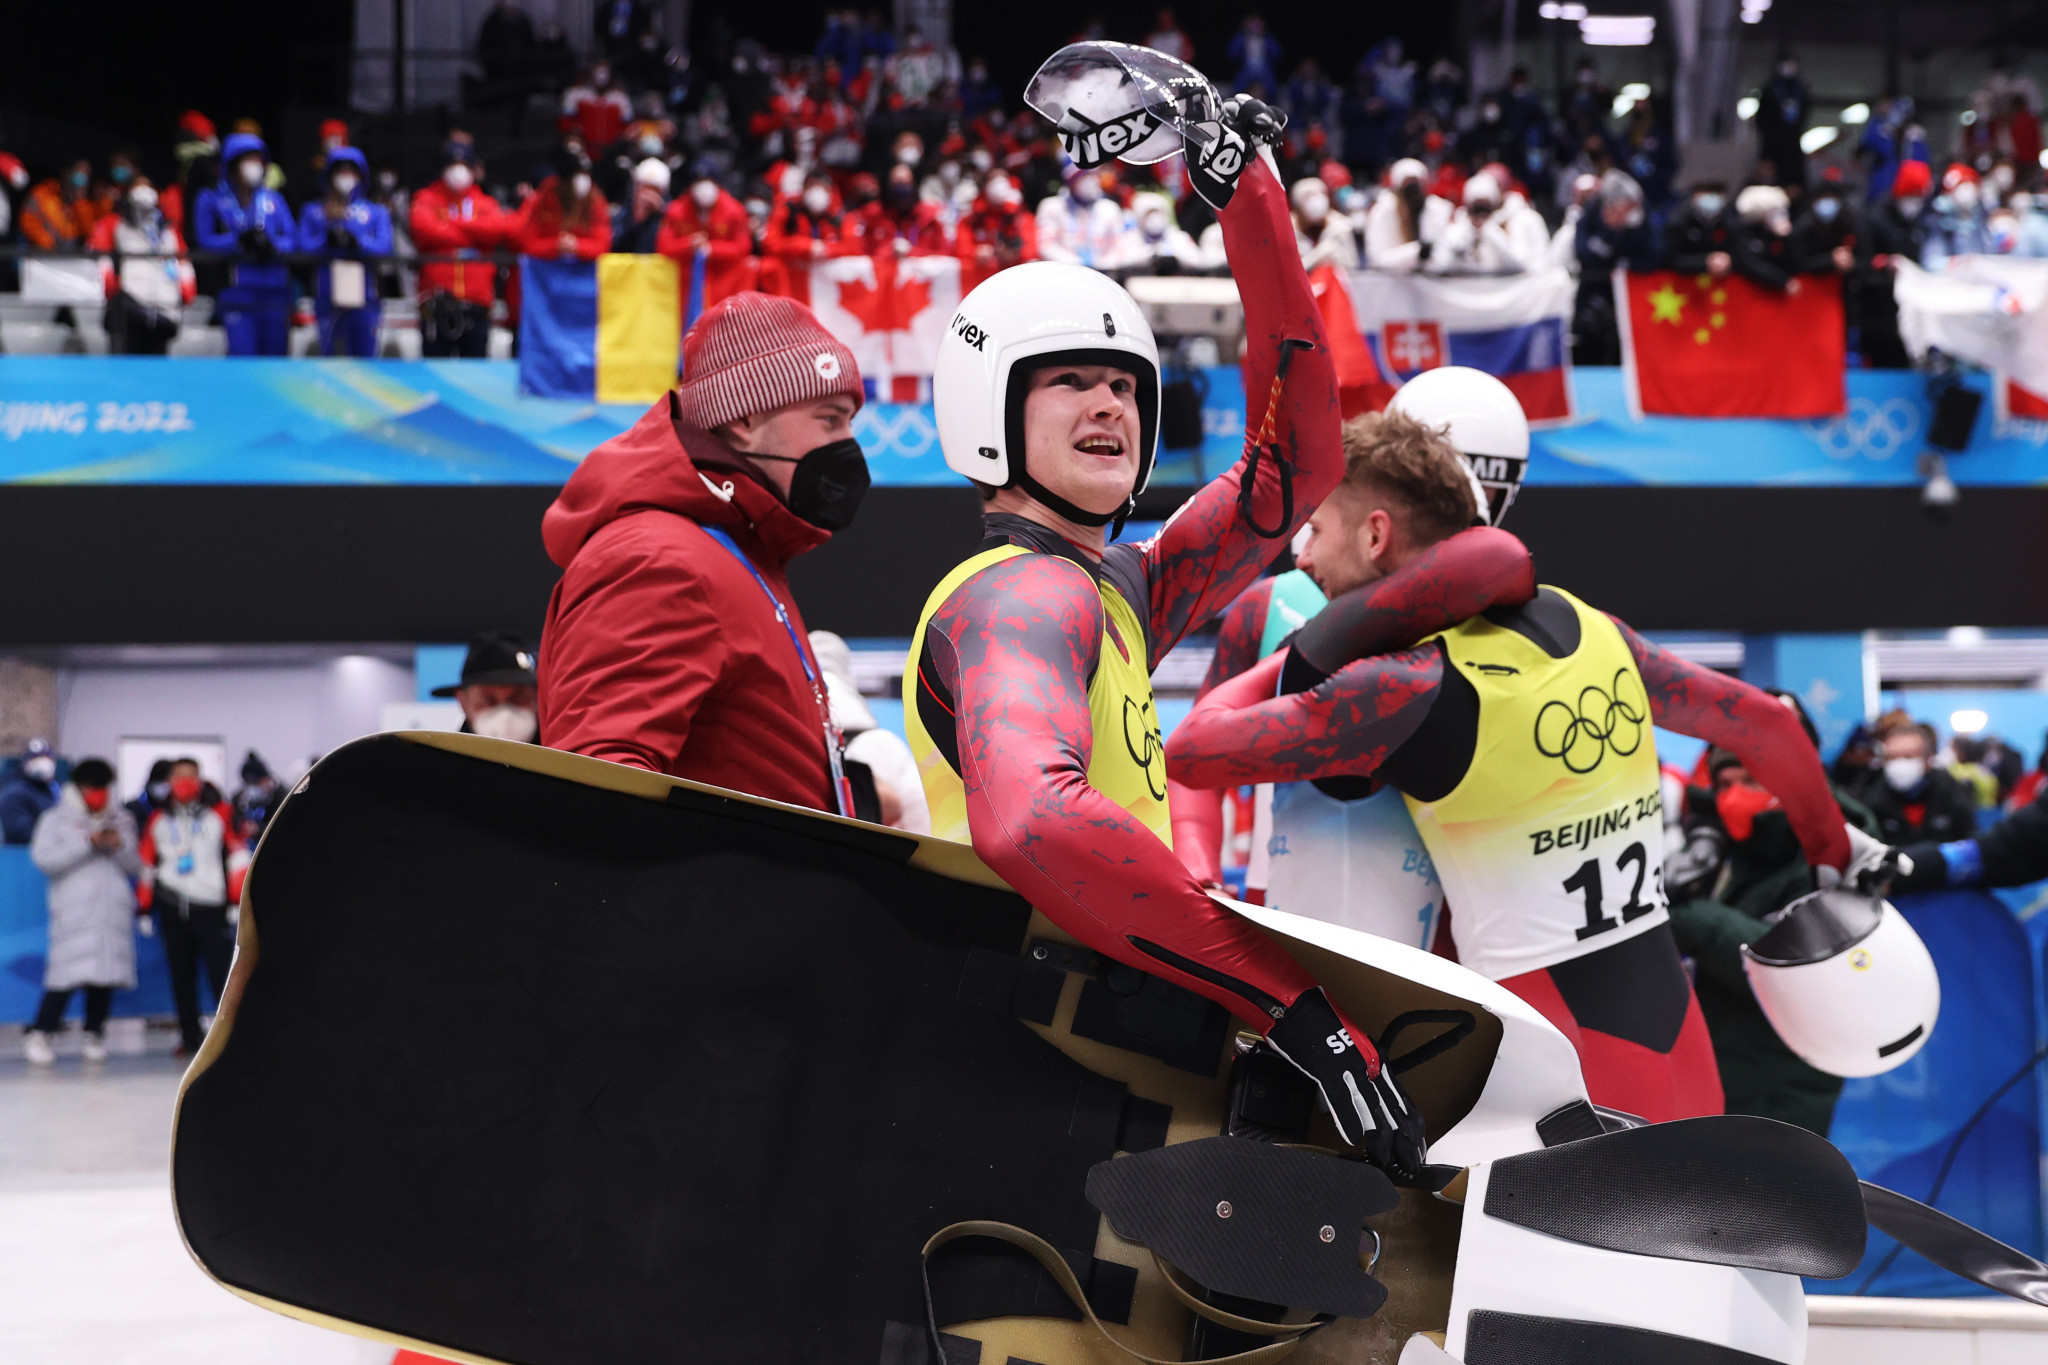 Latvia's only sliding gold medal at Beijing 2022 came in the luge team relay ©Getty Images